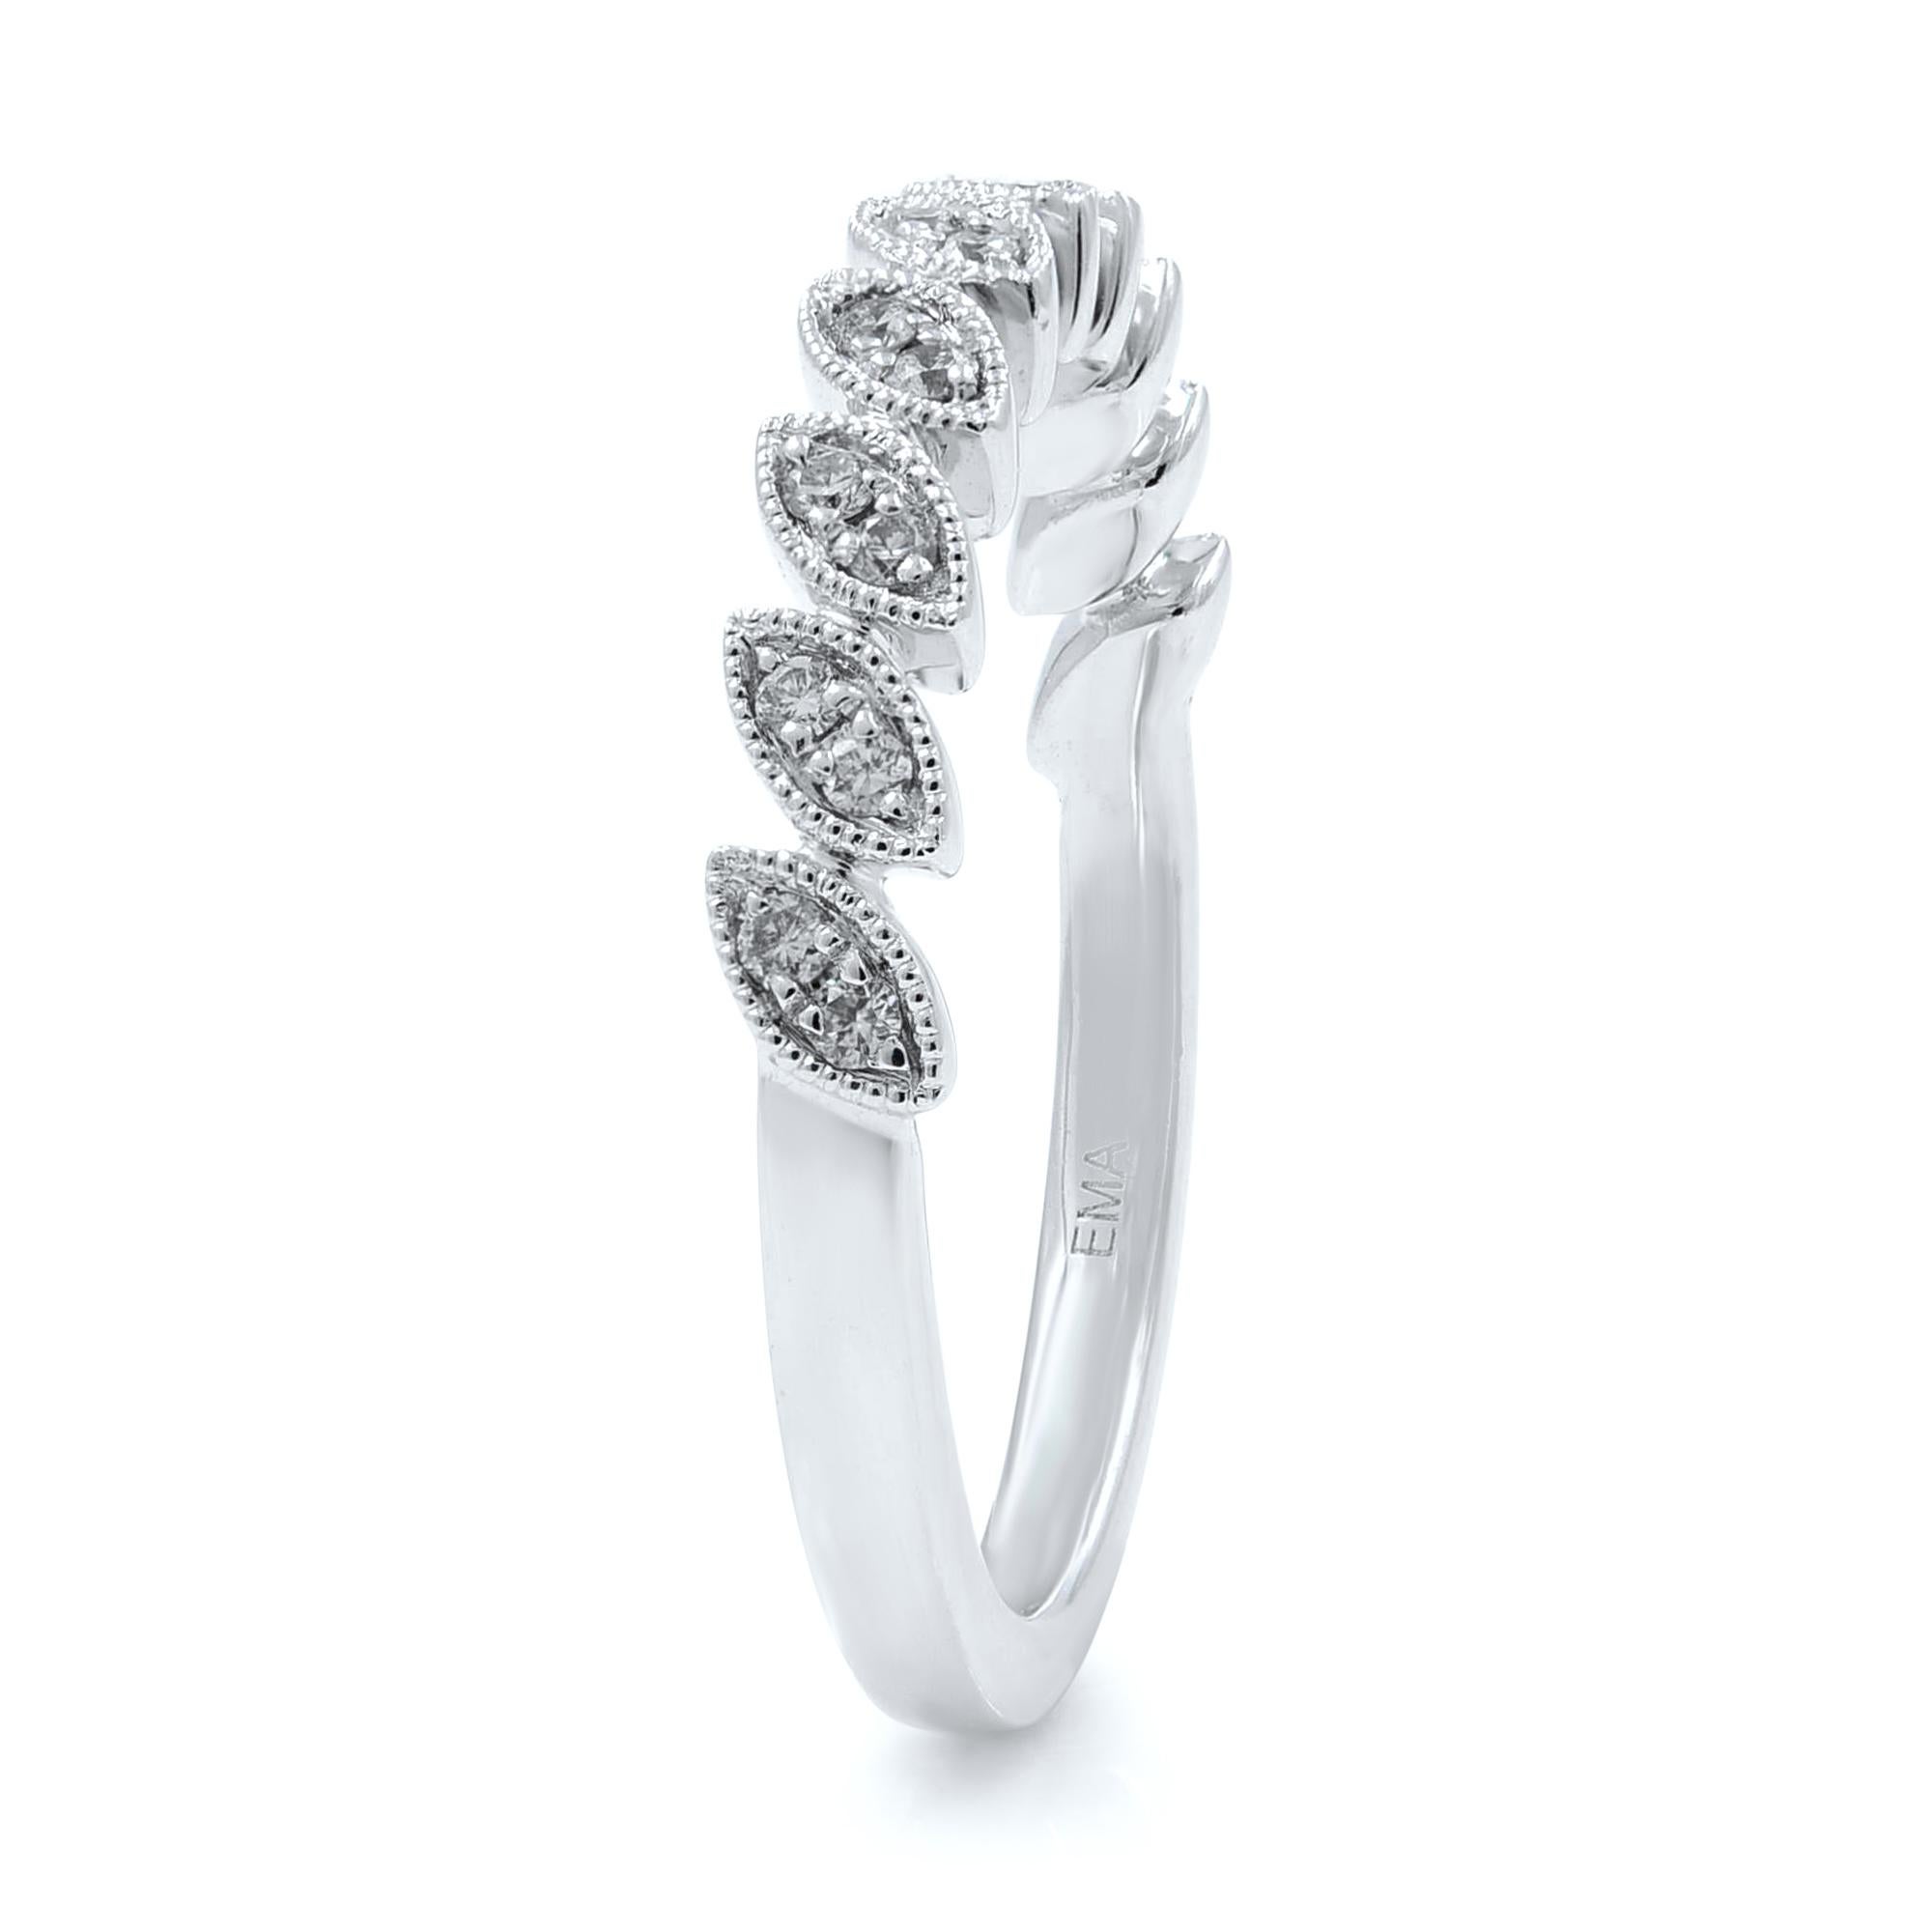 This contemporary wedding band from our Rachel Koen Bridal Collection could be a great option to celebrate the day you exchange vows with the love of your life. This wedding band appeals to both the contemporary and classic. The 14k white gold has